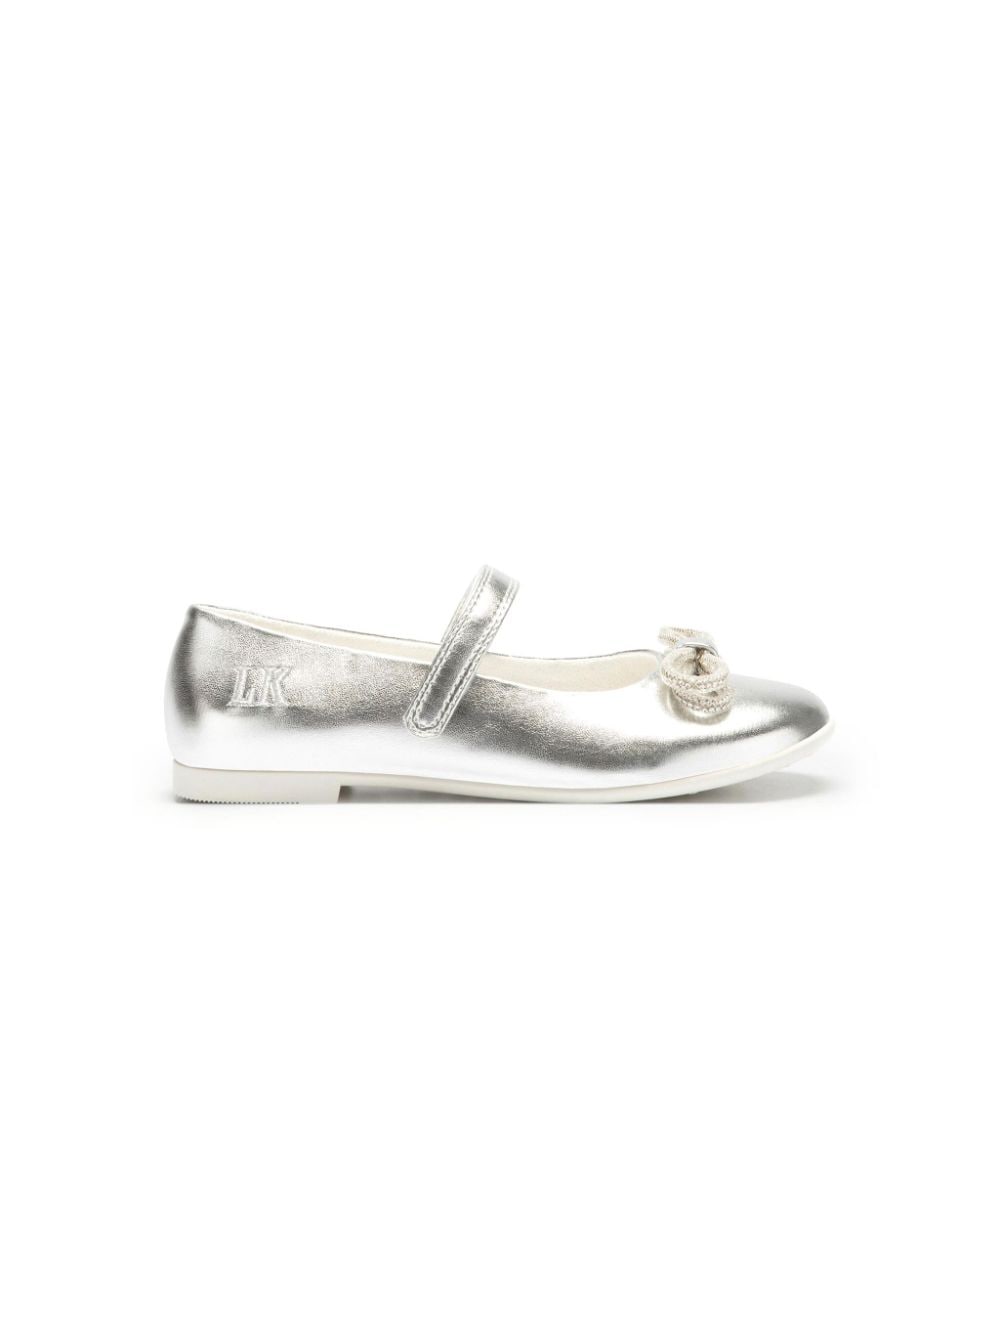 Shop Lelli Kelly Serena Bow-detail Ballerina Shoes In Silver